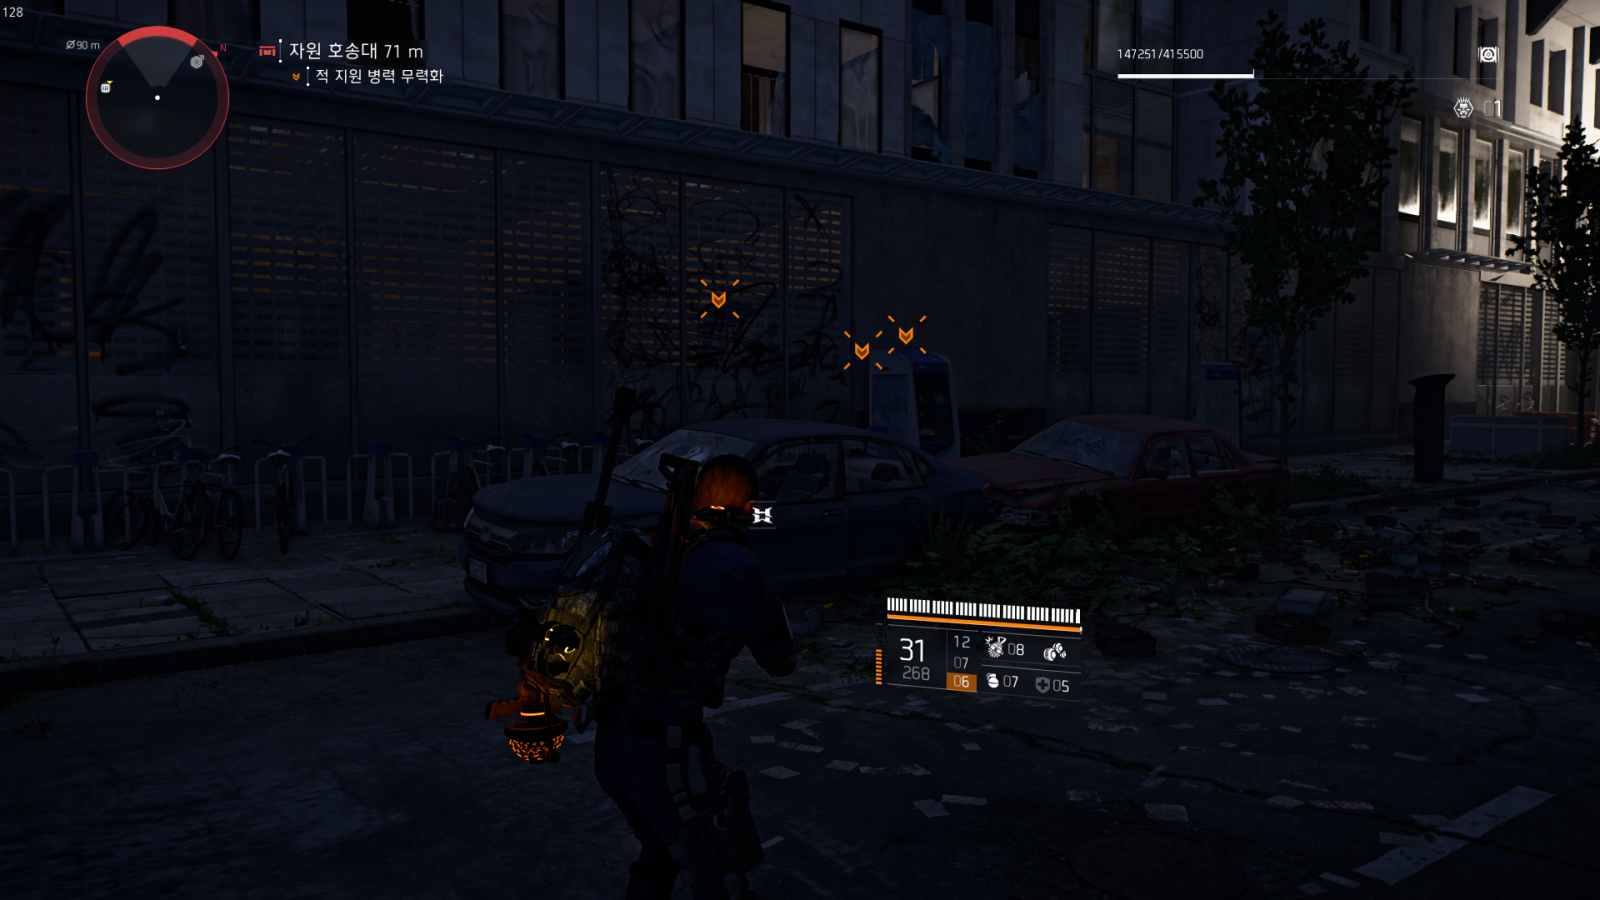 Tom Clancy\'s The Division 2 Screenshot 2020.02.25 - 10.20.20.26.png